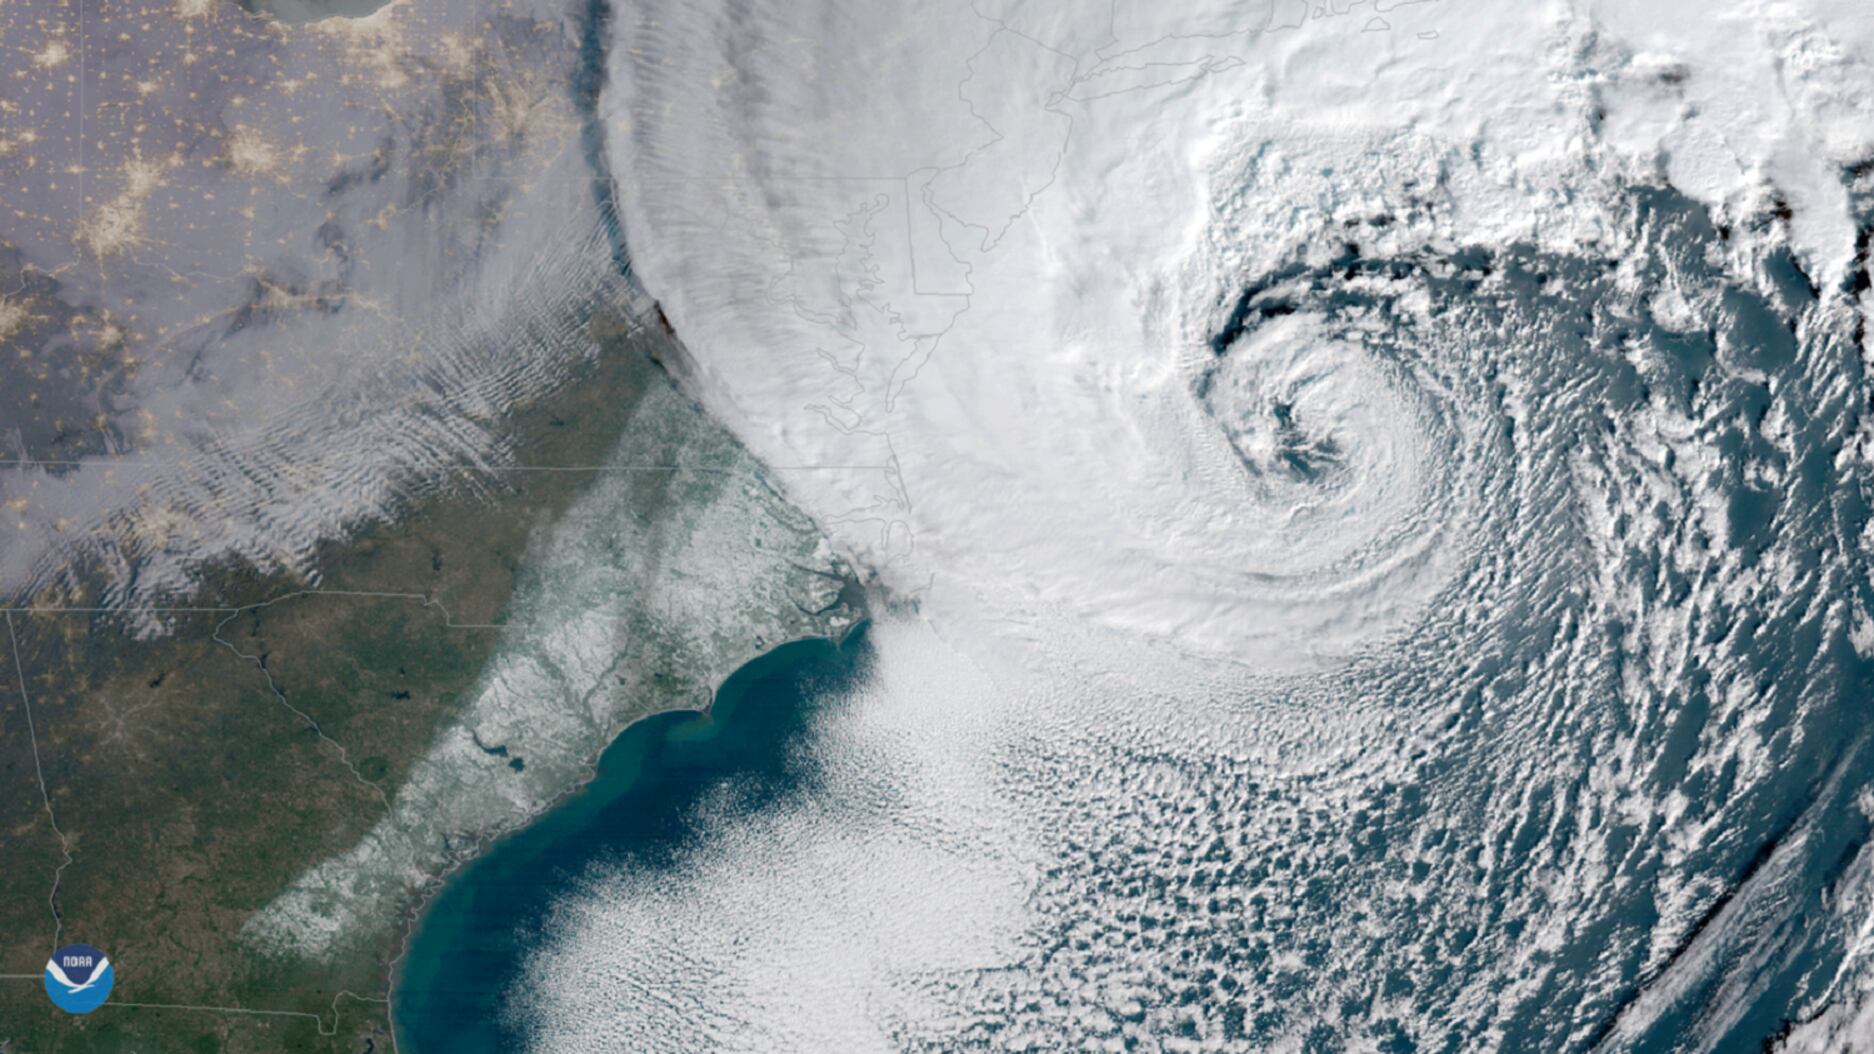 The extreme storm is one of the strongest to hit the country in recent history.